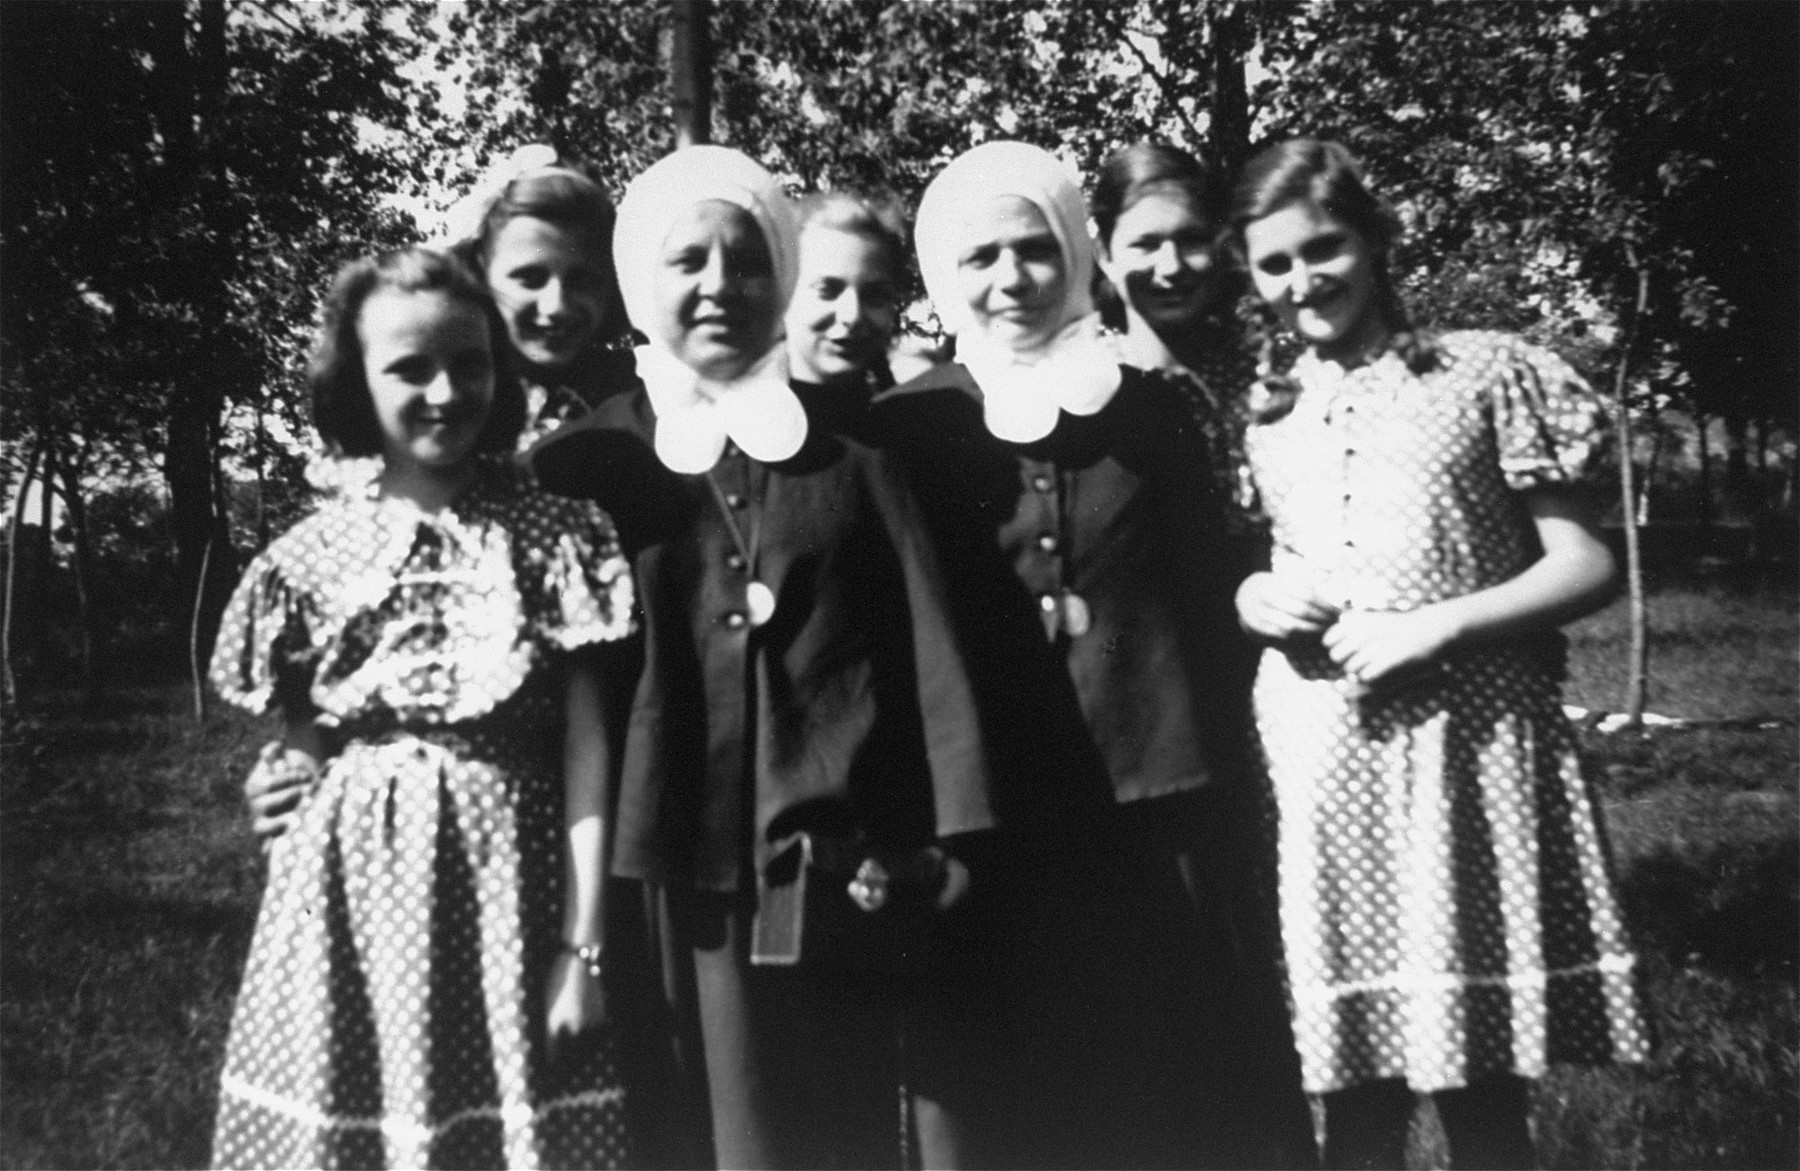 Dorottya Dezsoefi (first row, right) and her twin sister Ida Marianne (second row, center) pose with two nuns outside of the convent school where they were hidden for two years.  

Sister Gabriella is in the first row, beside Dorottya.